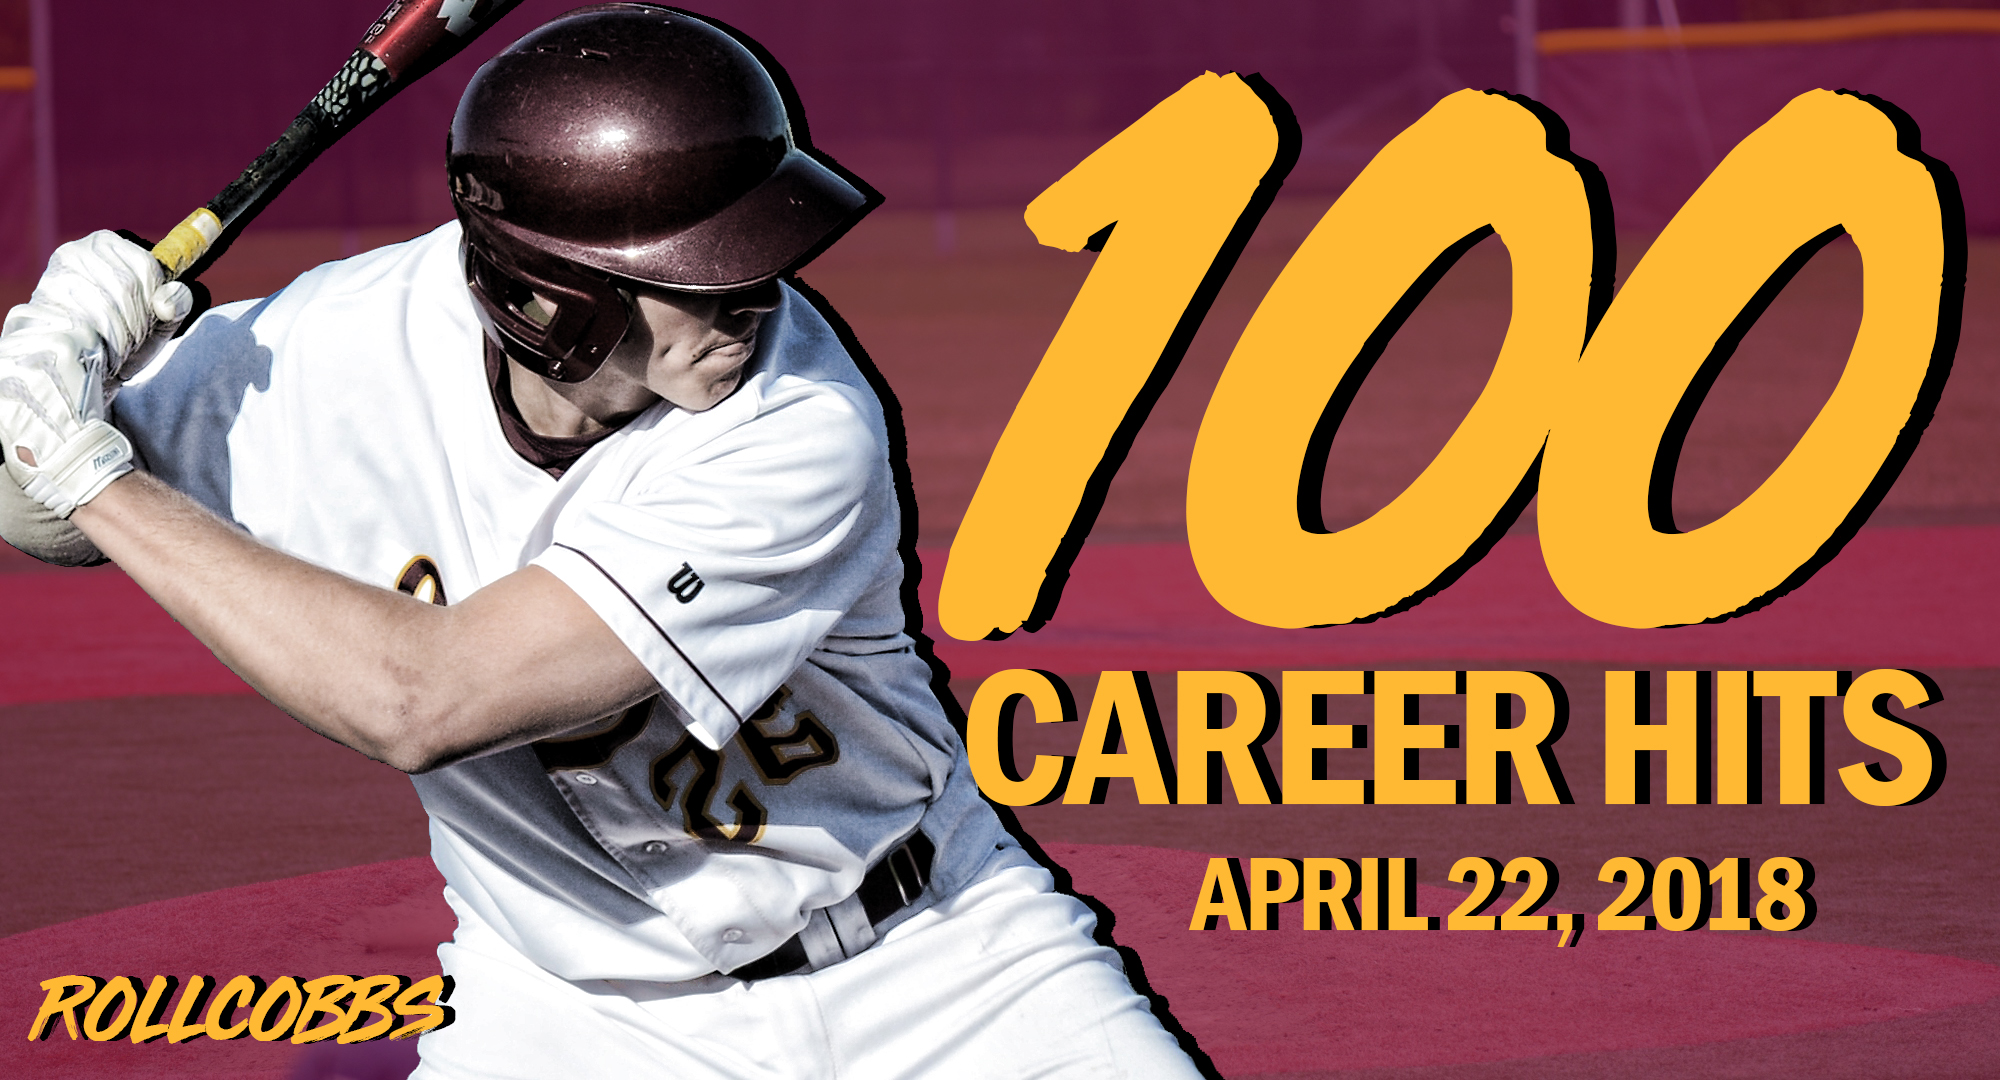 Senior Turner Storm collected his 100th career hit in the first game of the Cobbers twinbill with St. Olaf.